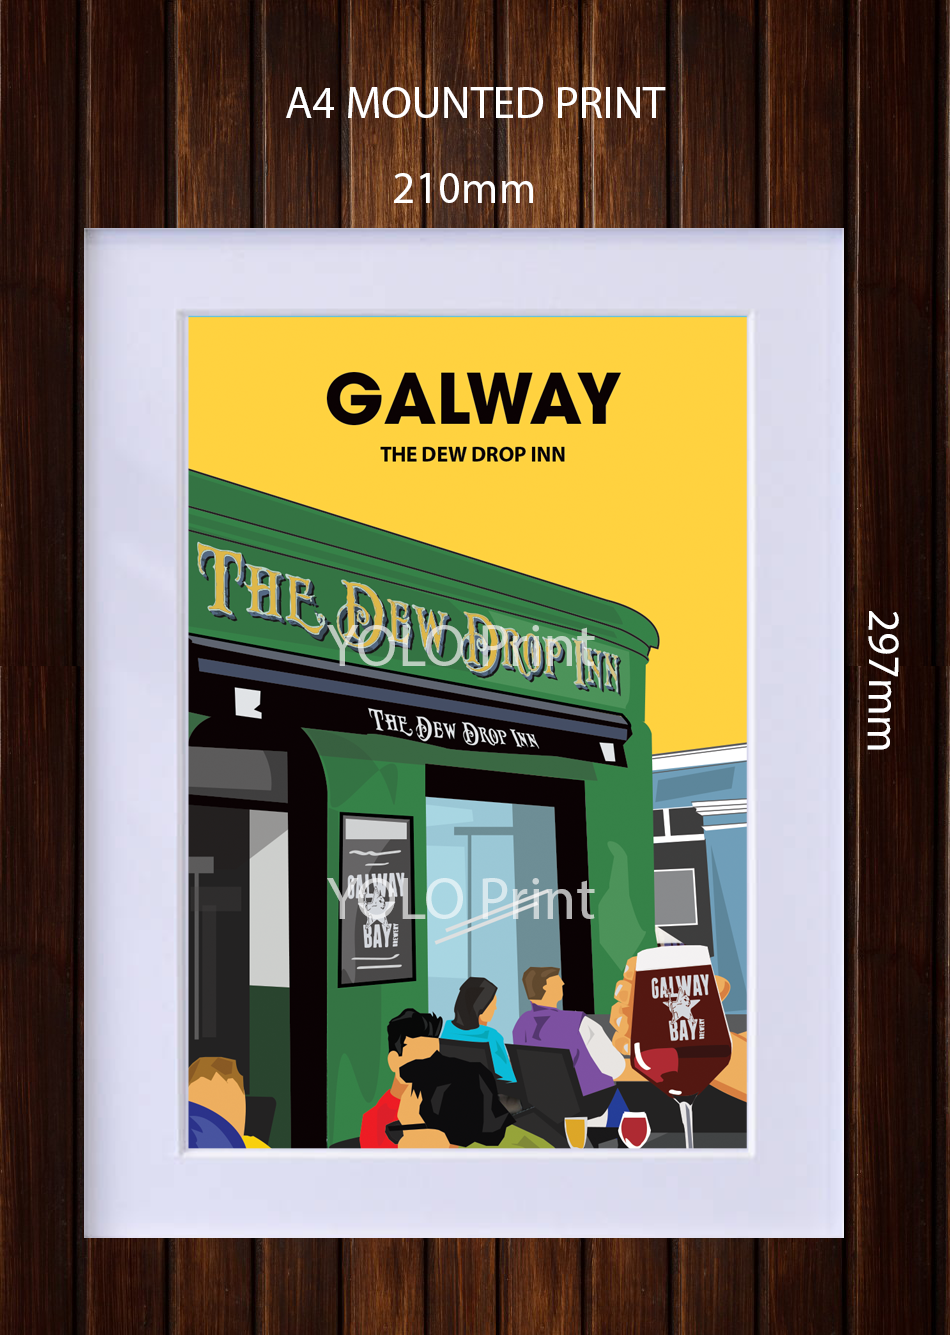 Galway Postcard or A4 Mounted Print  - The Dew Drop